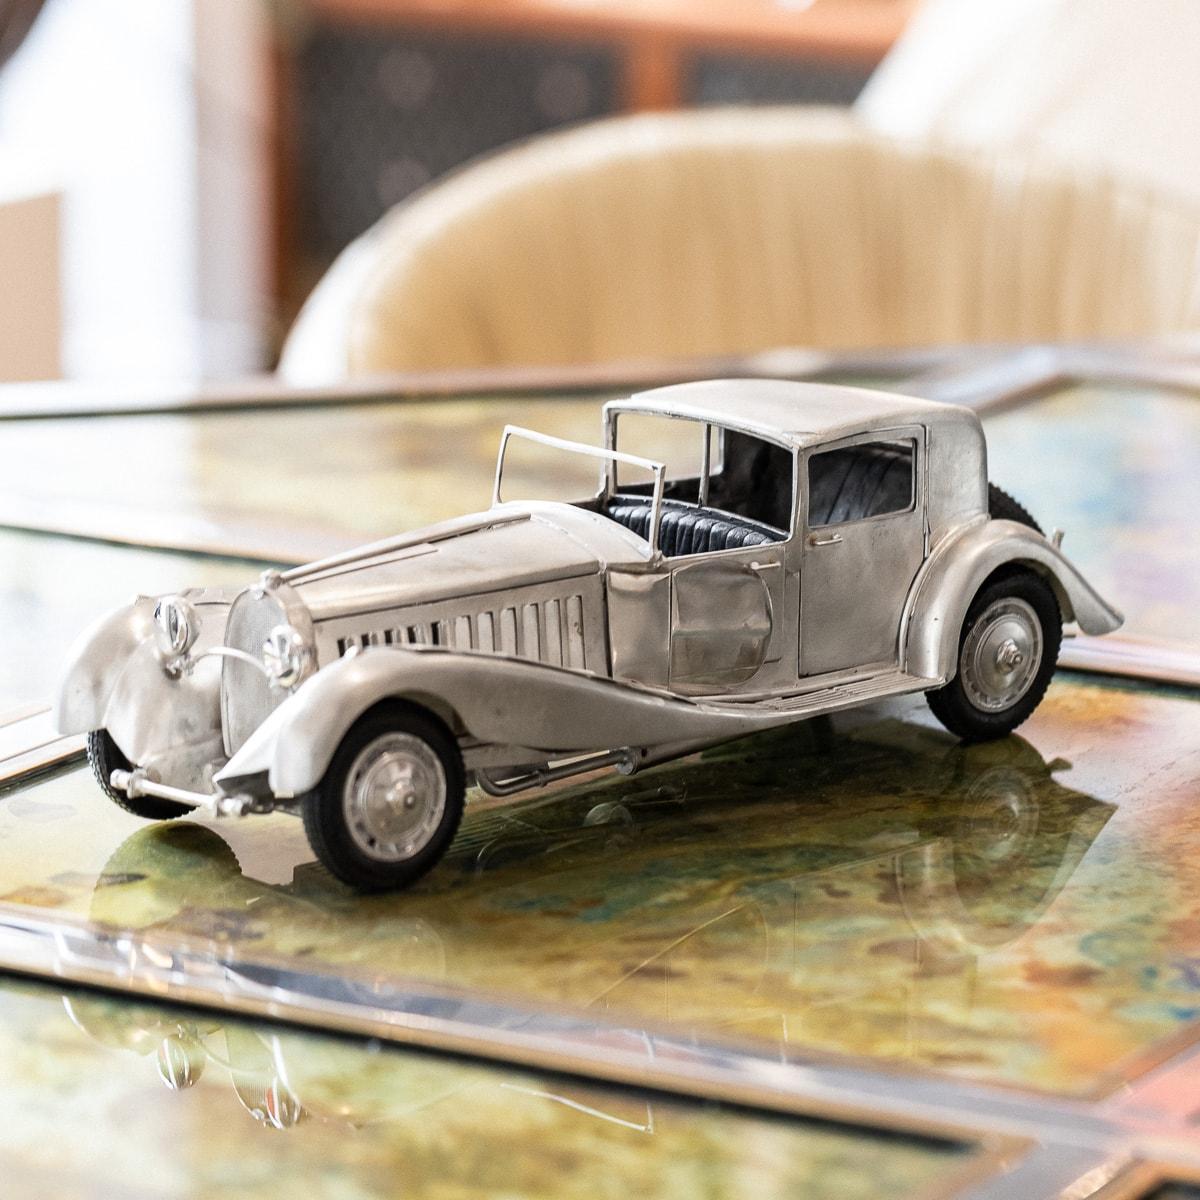 Stylish mid-20th Century model of a Bugatti Type 41, better known as the Bugatti Royale. This model is crafted from nearly 3 kilograms of solid silver with the highest attention to detail. The car comes with rubber tyres, including a spare fitted to